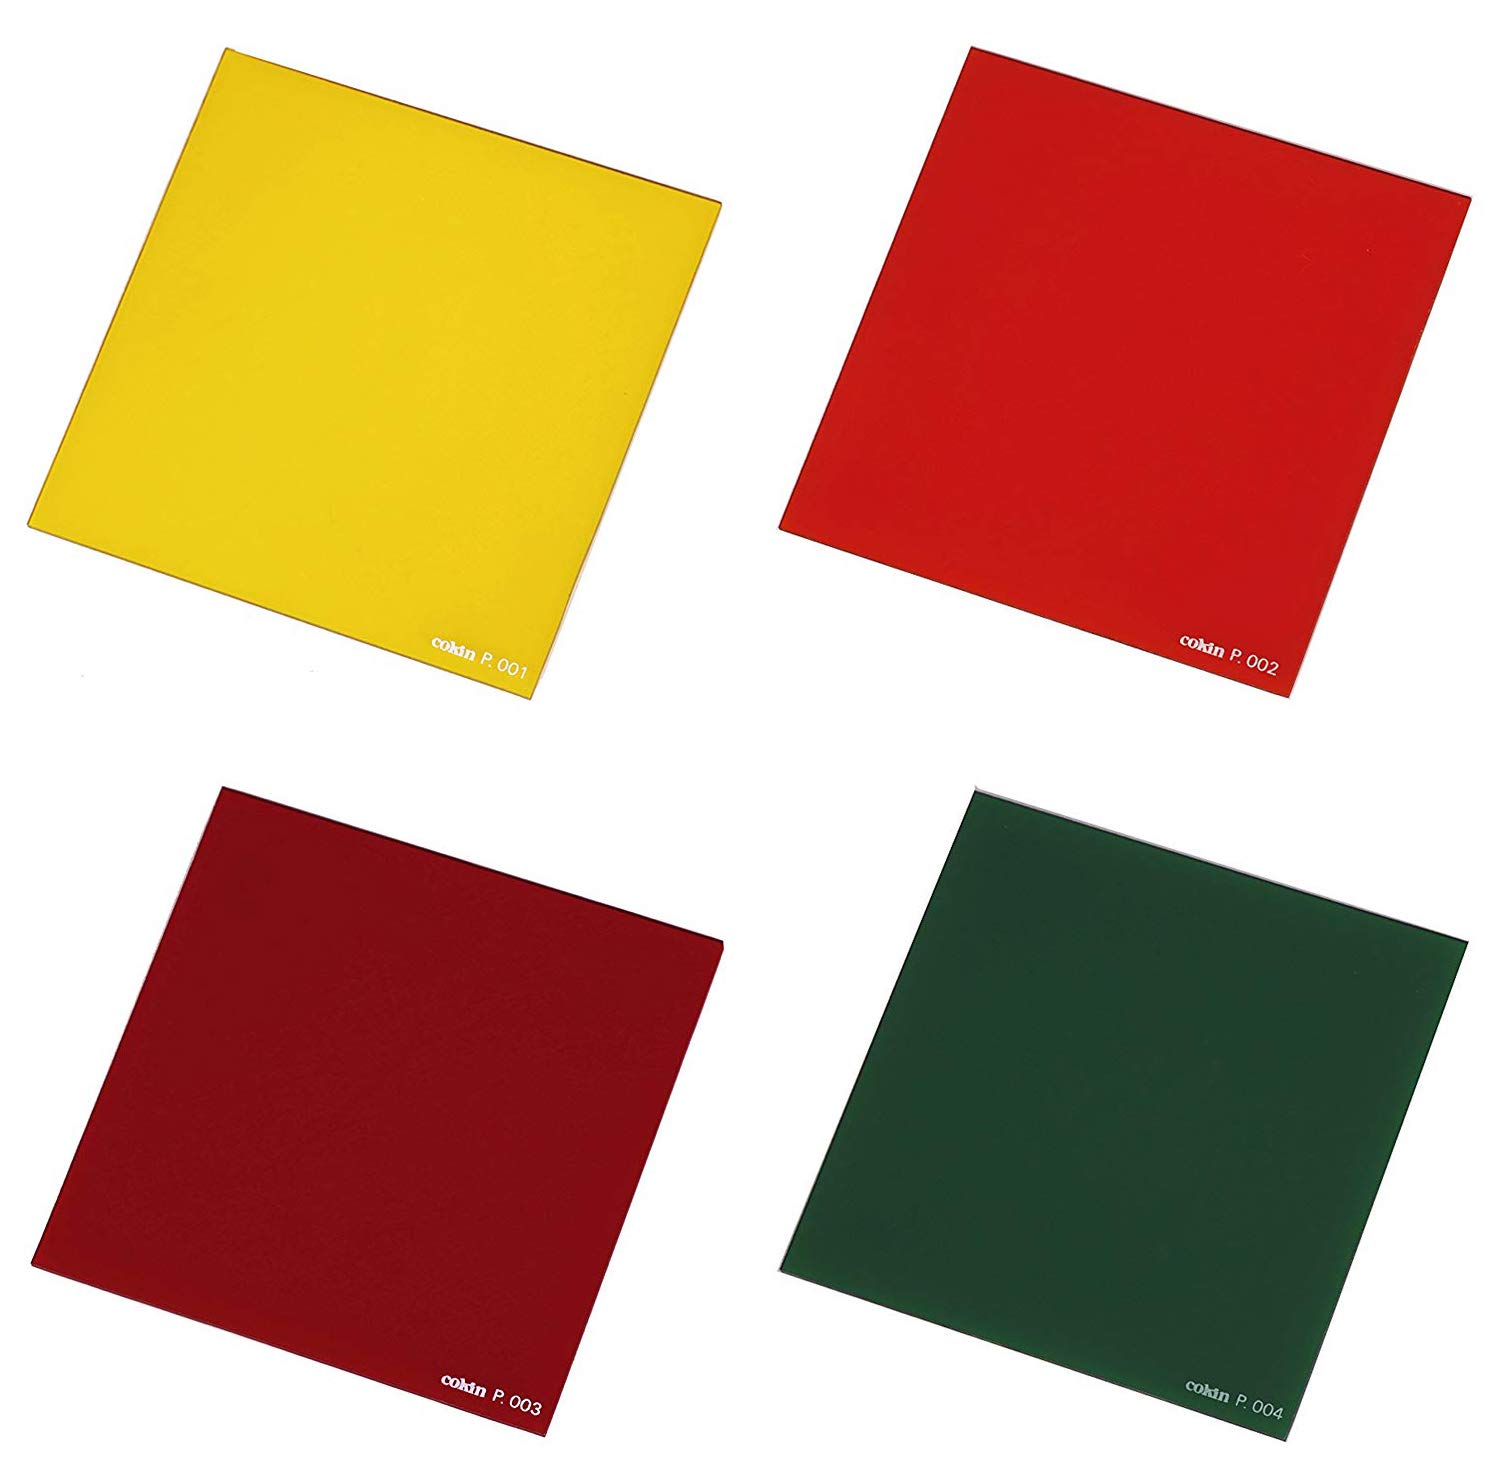 Cokin Square Filter Black & White Creative Kit - Includes Yellow (001), Orange (002), Red (003), Green (004) for M (P) Series Holder - 84mm X 84mm